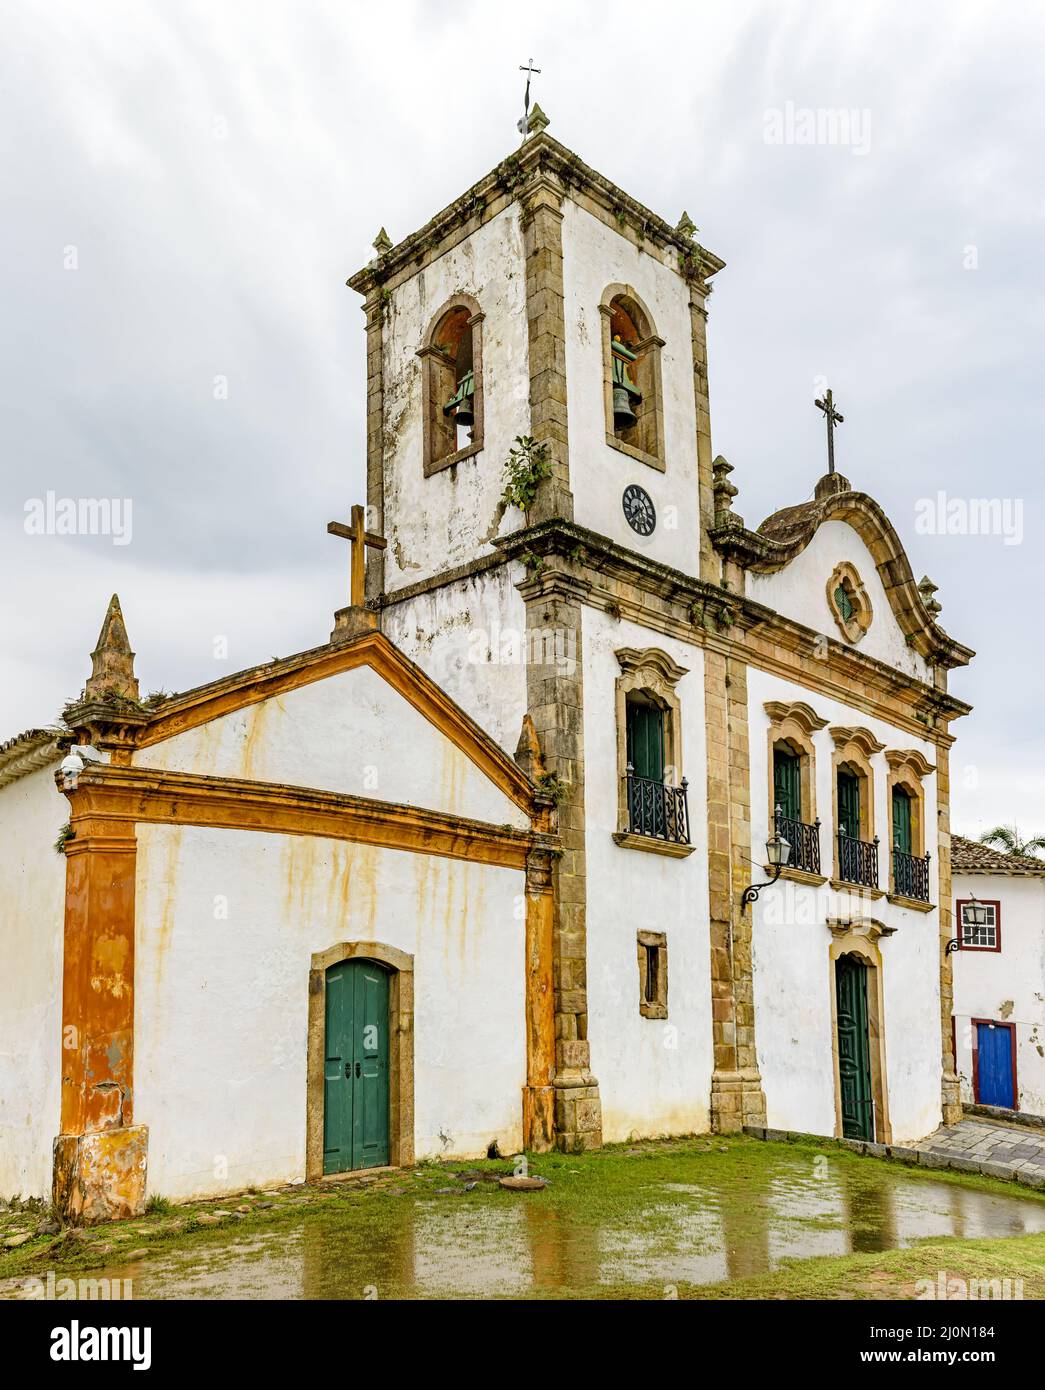 View of the facade of a historic church in the city of Paraty Stock Photo